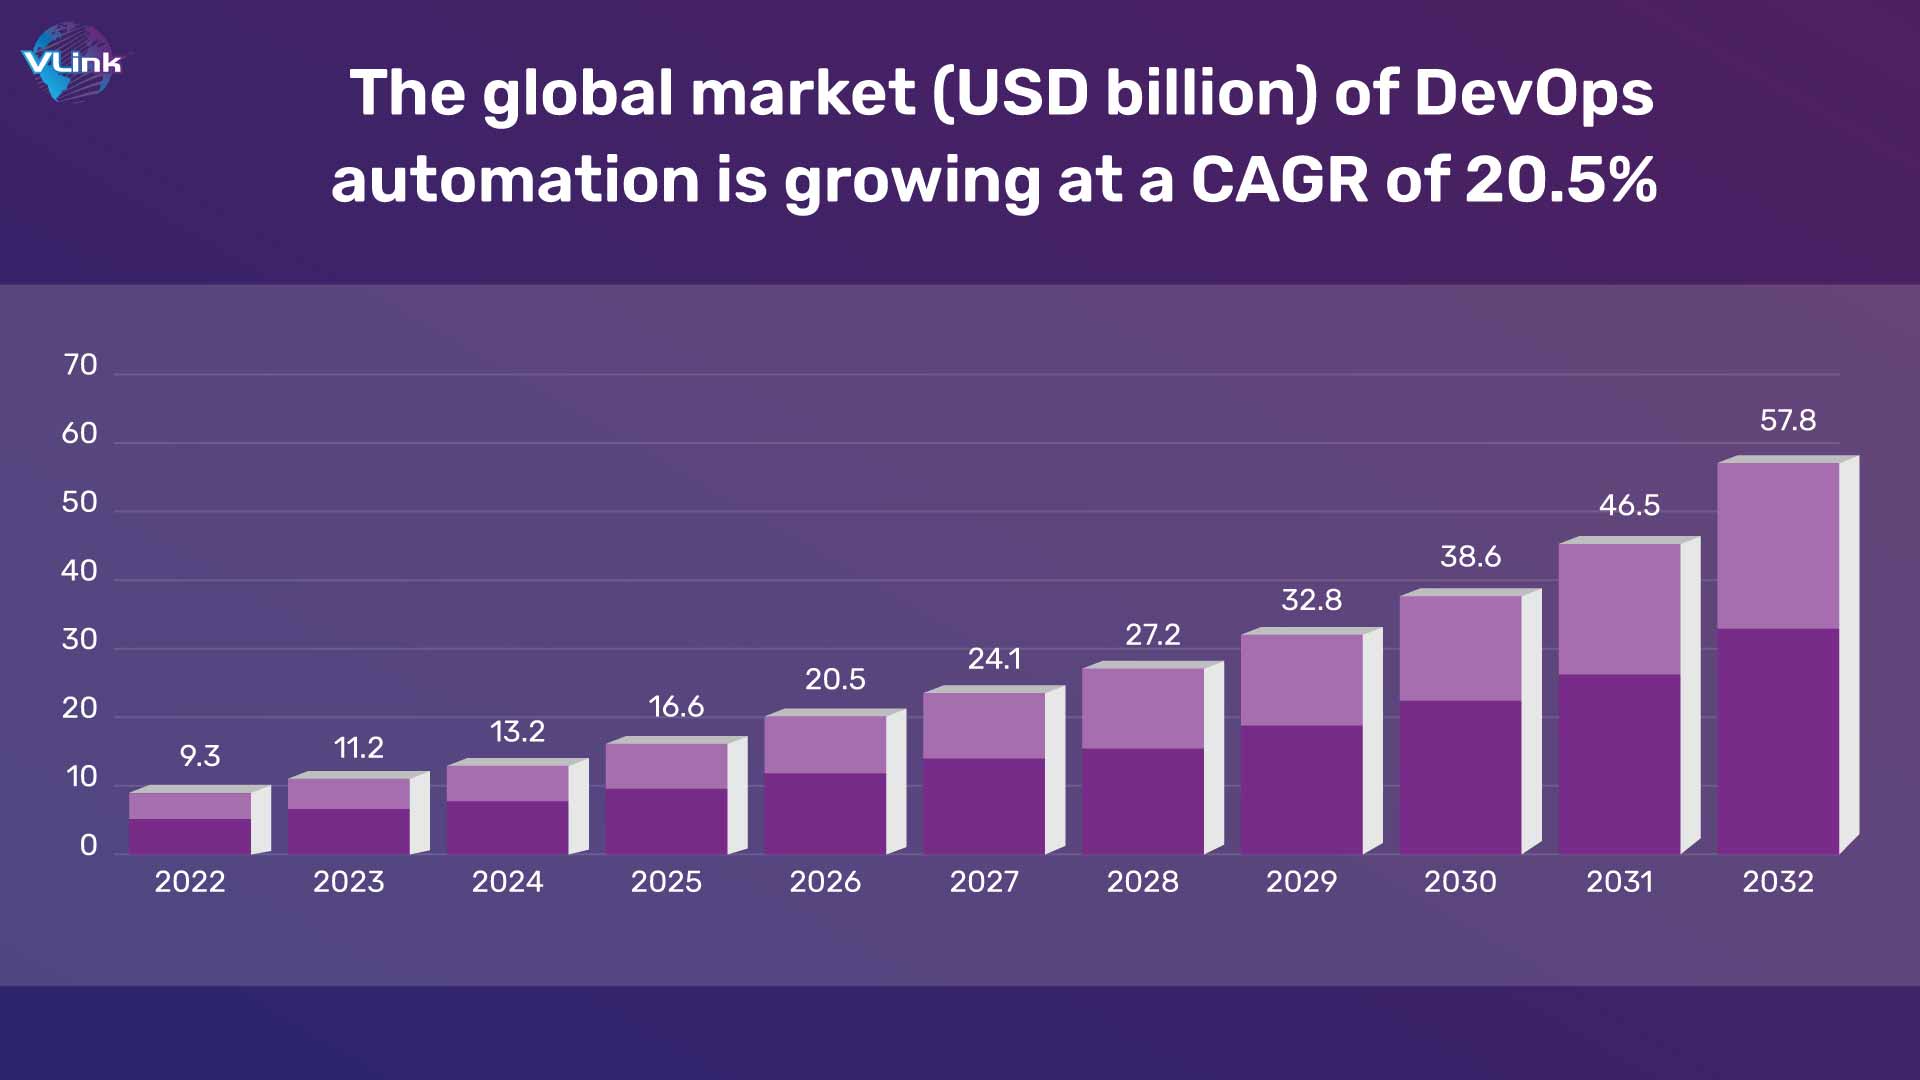 The global market (USD billion) of DevOps automation is growing at a CAGR of 20.5%